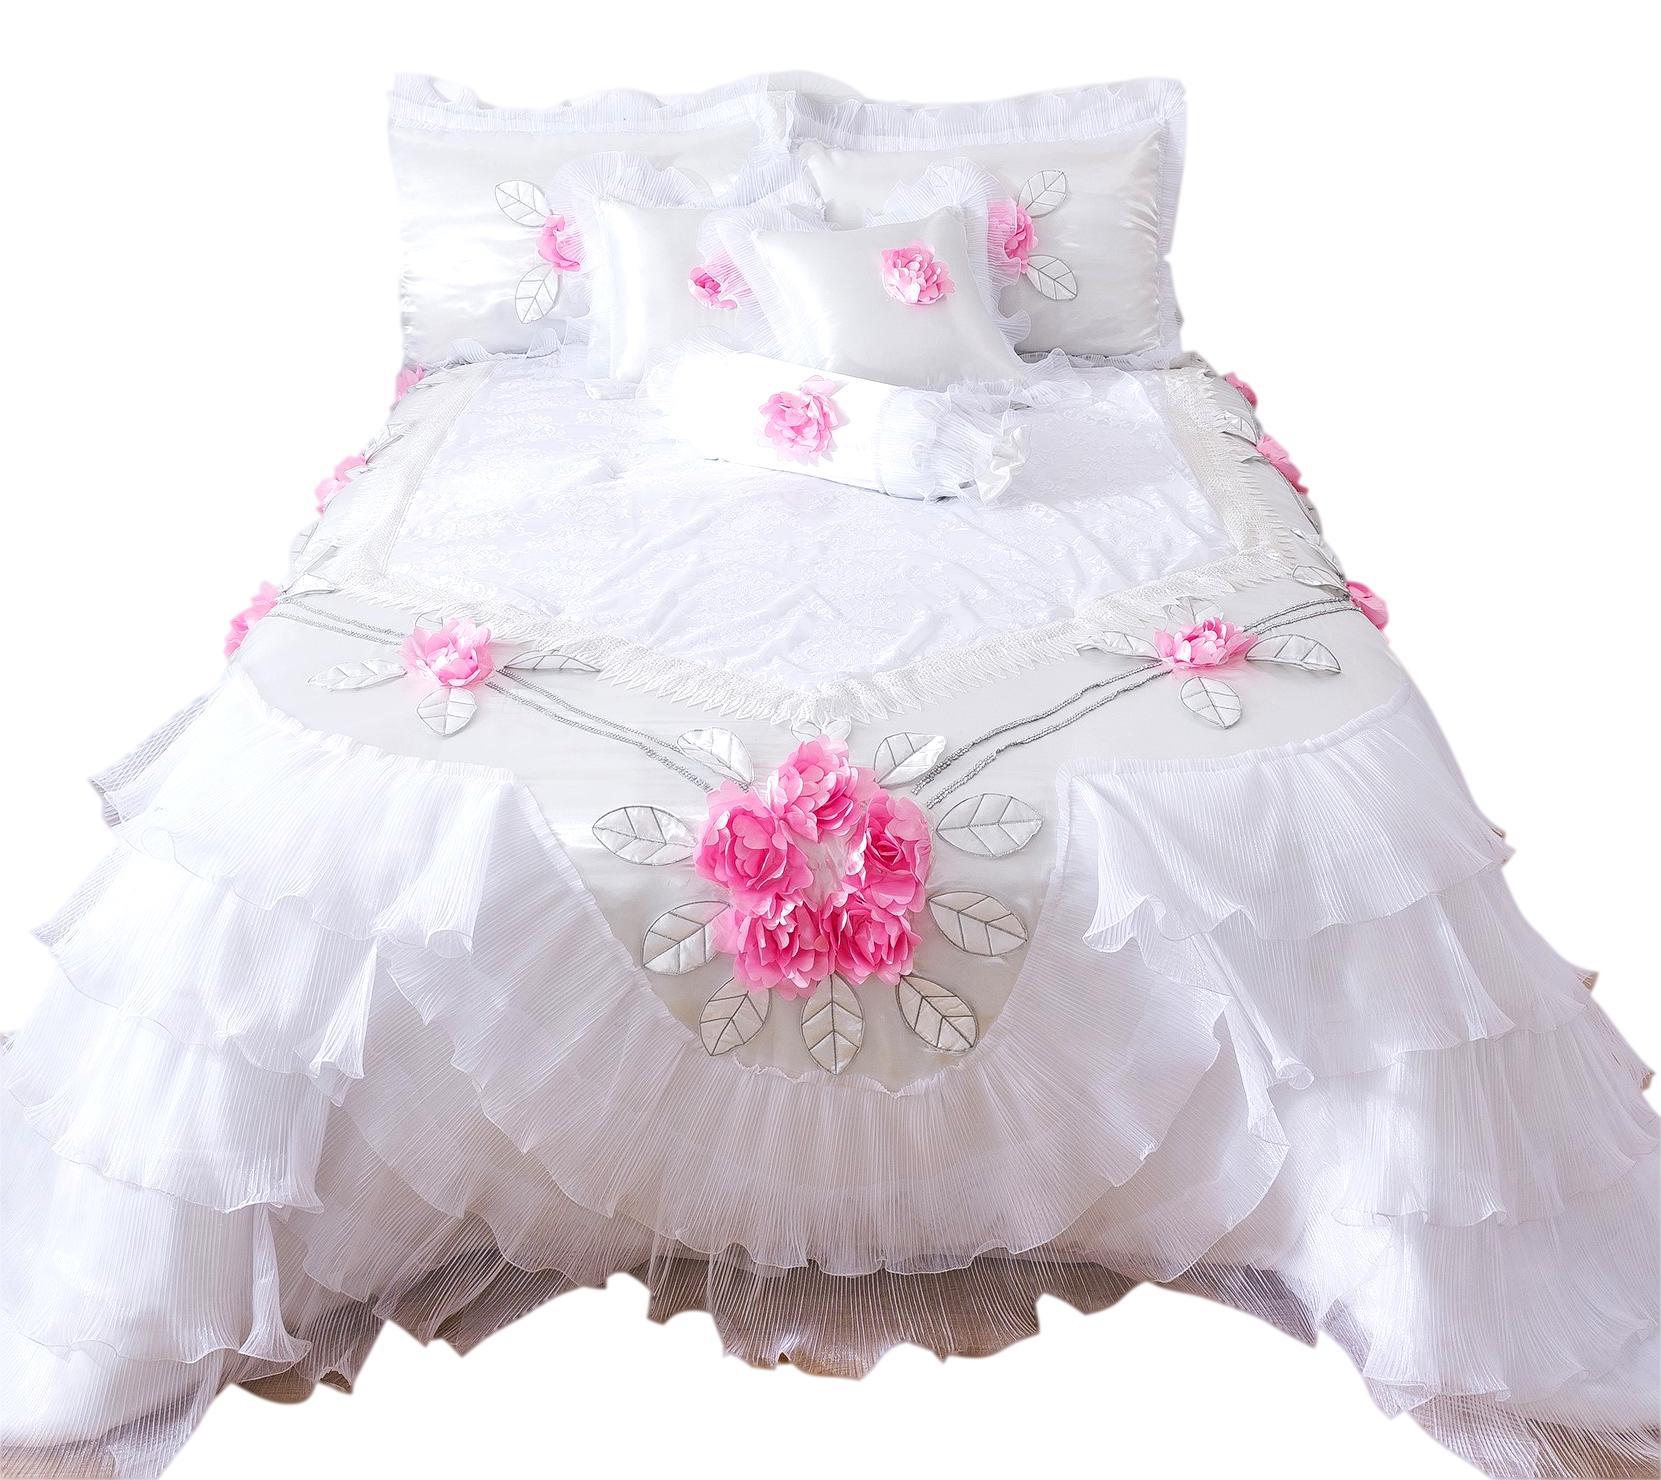 Tache Ruffle Floral Lace Satin White Pink Luxury Delicate Rose Comforter Set (MA125)